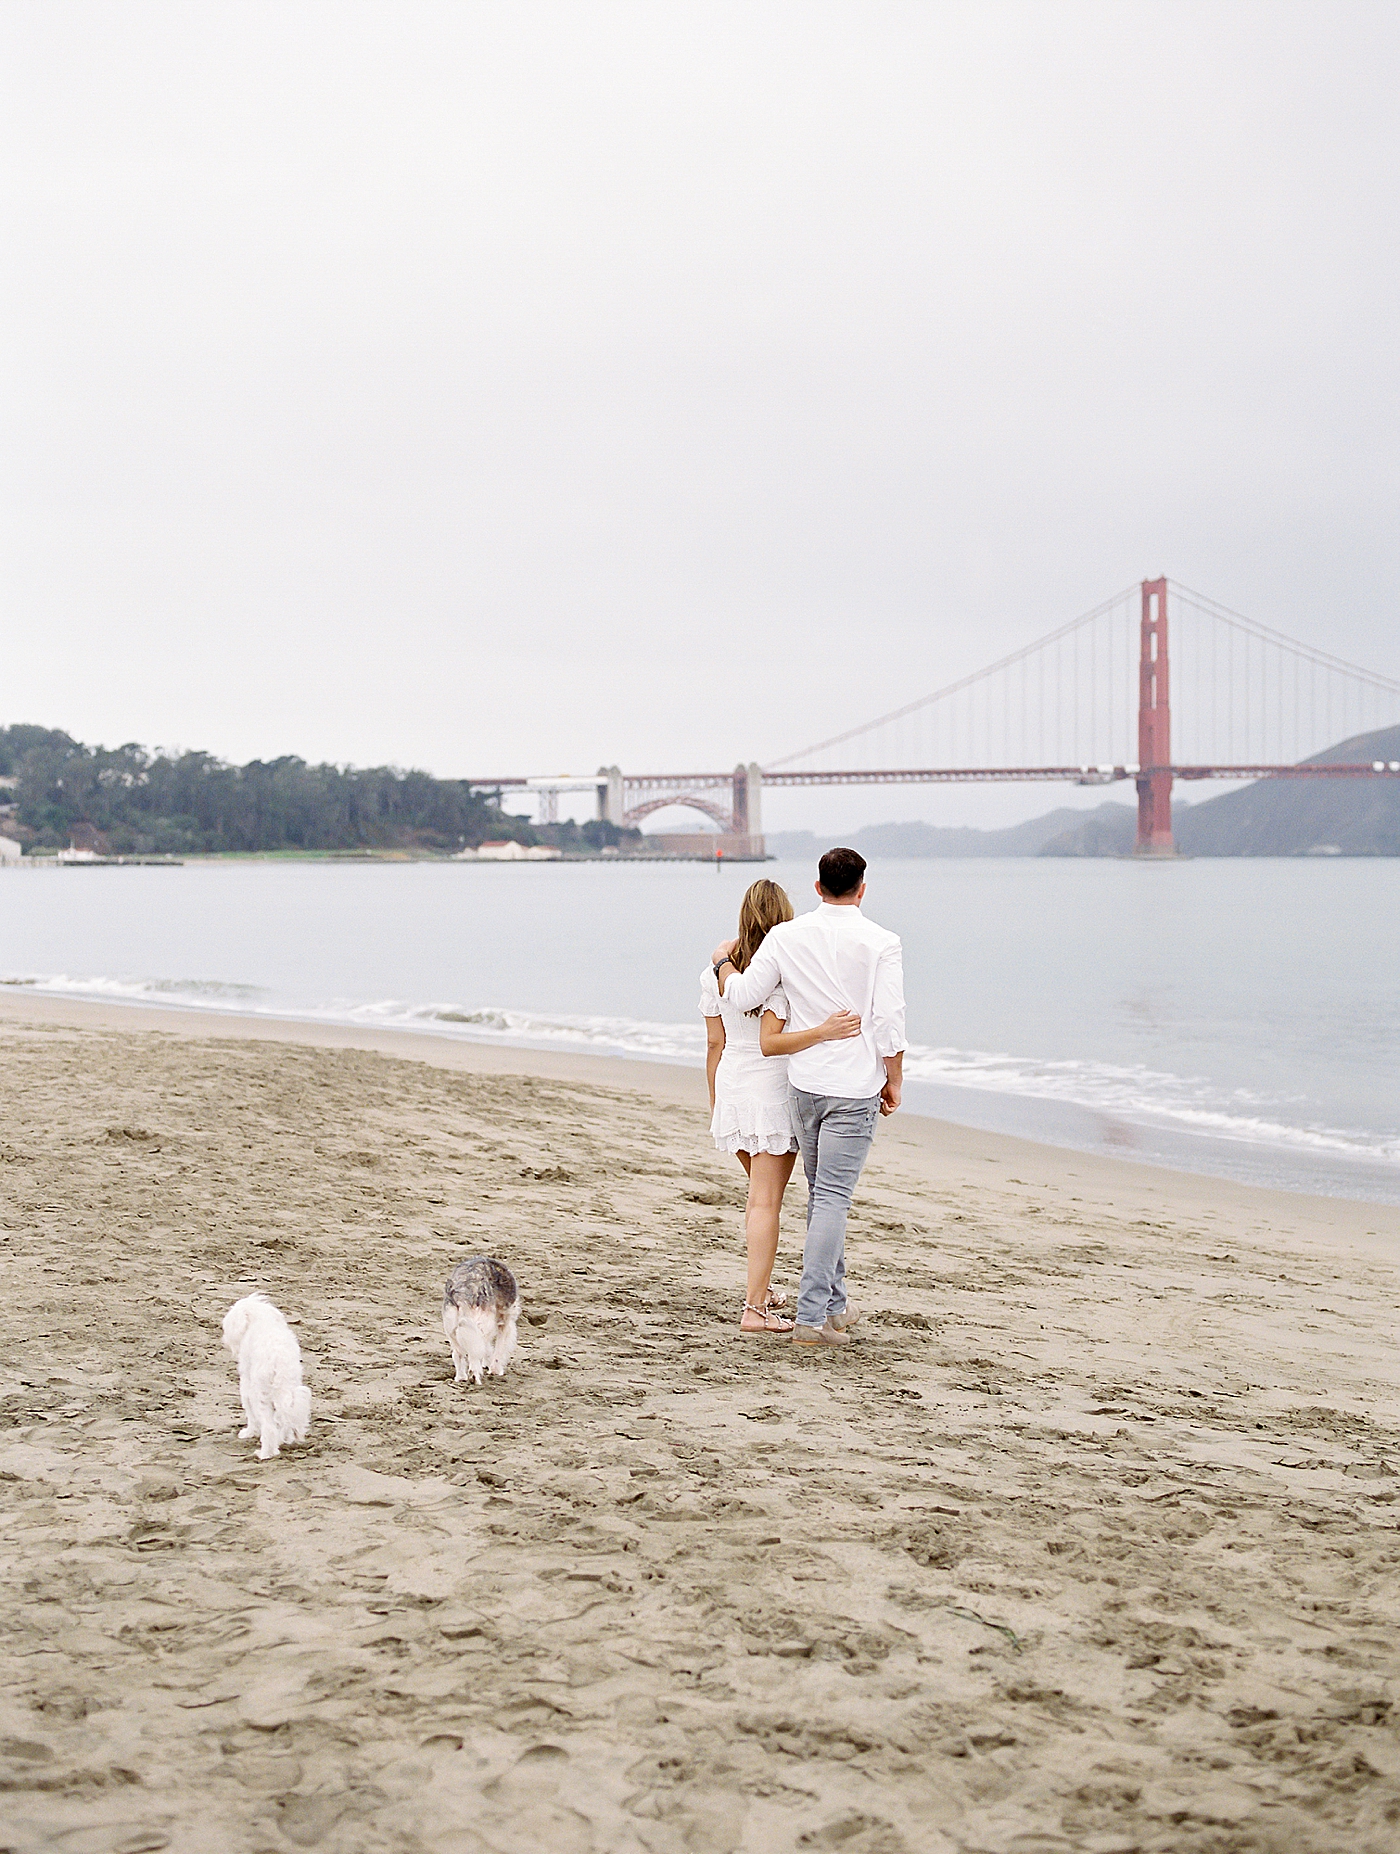 Couple walking together with their dogs near San Francisco Bay | Photo by Diane Sotero